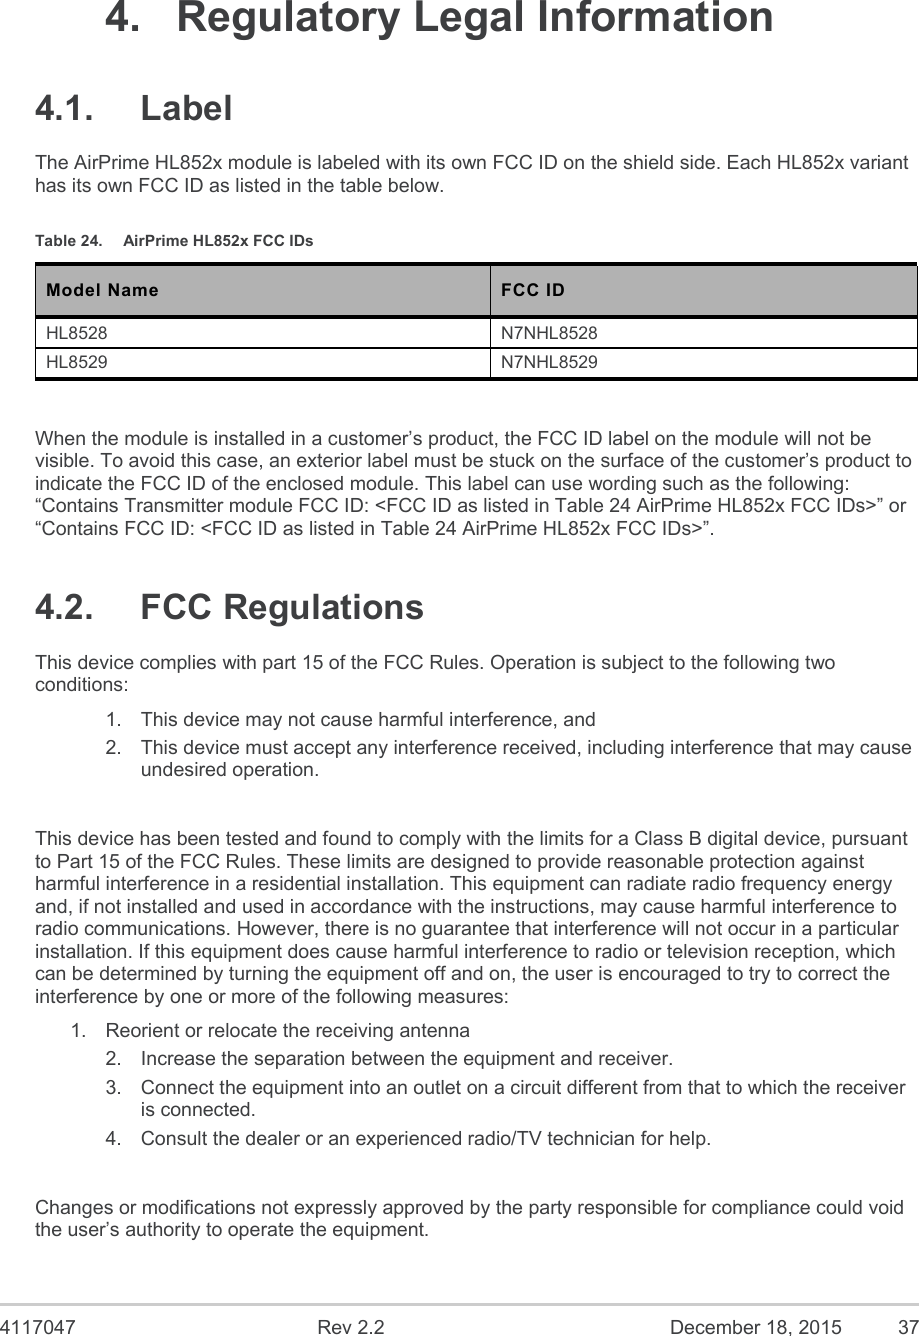  4117047  Rev 2.2  December 18, 2015  37  4.  Regulatory Legal Information 4.1.  Label The AirPrime HL852x module is labeled with its own FCC ID on the shield side. Each HL852x variant has its own FCC ID as listed in the table below. Table 24.  AirPrime HL852x FCC IDs Model Name  FCC ID HL8528  N7NHL8528 HL8529  N7NHL8529  When the module is installed in a customer’s product, the FCC ID label on the module will not be visible. To avoid this case, an exterior label must be stuck on the surface of the customer’s product to indicate the FCC ID of the enclosed module. This label can use wording such as the following: “Contains Transmitter module FCC ID: &lt;FCC ID as listed in Table 24 AirPrime HL852x FCC IDs&gt;” or “Contains FCC ID: &lt;FCC ID as listed in Table 24 AirPrime HL852x FCC IDs&gt;”. 4.2.  FCC Regulations This device complies with part 15 of the FCC Rules. Operation is subject to the following two conditions: 1.  This device may not cause harmful interference, and 2.  This device must accept any interference received, including interference that may cause undesired operation.  This device has been tested and found to comply with the limits for a Class B digital device, pursuant to Part 15 of the FCC Rules. These limits are designed to provide reasonable protection against harmful interference in a residential installation. This equipment can radiate radio frequency energy and, if not installed and used in accordance with the instructions, may cause harmful interference to radio communications. However, there is no guarantee that interference will not occur in a particular installation. If this equipment does cause harmful interference to radio or television reception, which can be determined by turning the equipment off and on, the user is encouraged to try to correct the interference by one or more of the following measures: 1.  Reorient or relocate the receiving antenna 2.  Increase the separation between the equipment and receiver. 3.  Connect the equipment into an outlet on a circuit different from that to which the receiver is connected. 4.  Consult the dealer or an experienced radio/TV technician for help.  Changes or modifications not expressly approved by the party responsible for compliance could void the user’s authority to operate the equipment. 